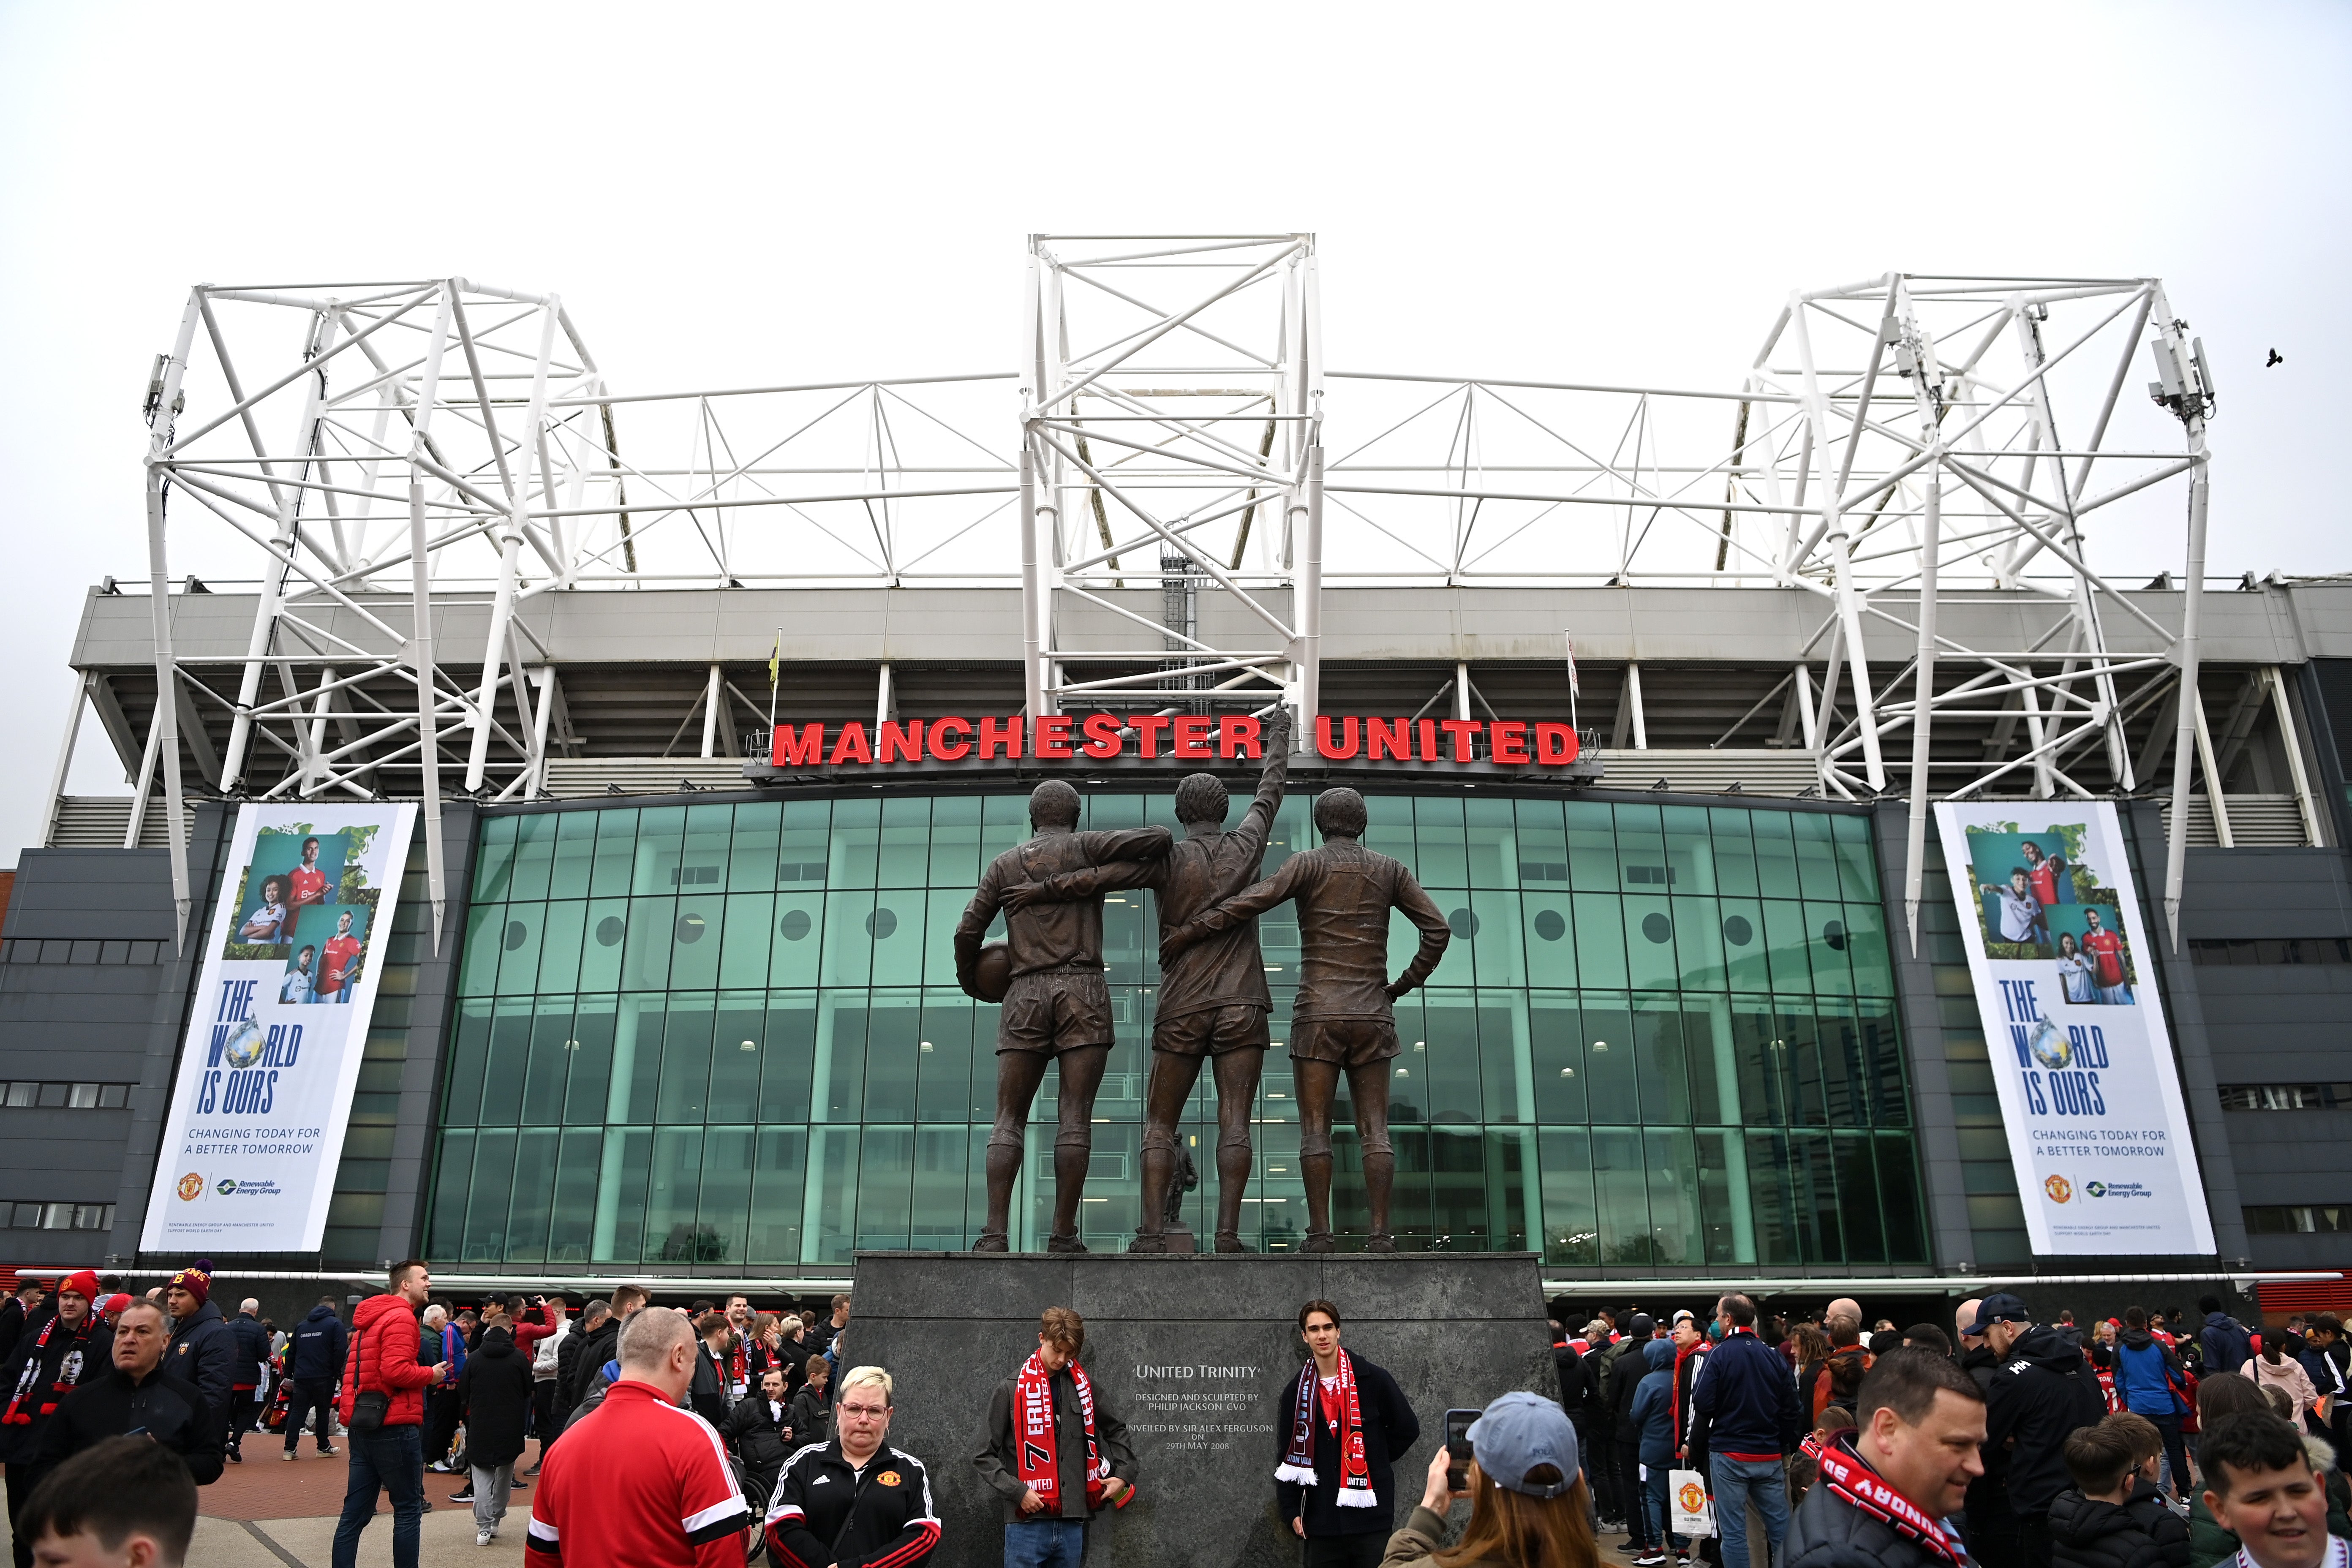 Old Trafford, home of Manchester United Football Club